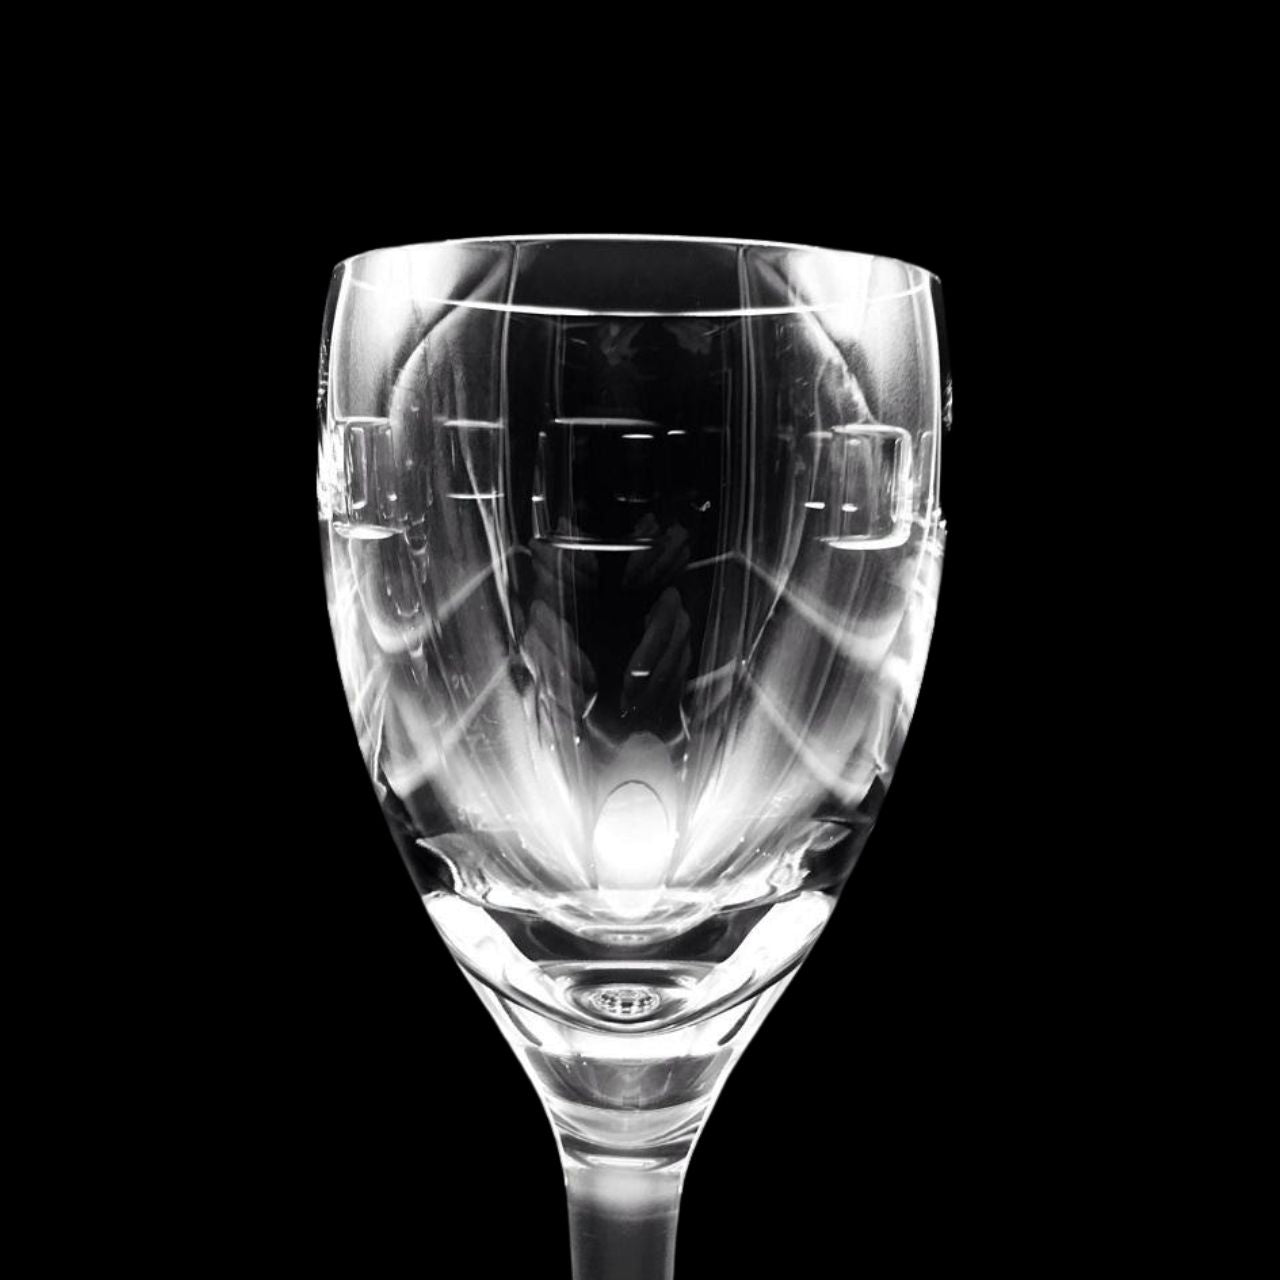 Waterford Crystal John Rocha Geo White Wine Glass Single  John Rocha Geo White Wine glass for Waterford. Featuring a dynamic geometric motif on brilliant crystal, John Rocha's Geo collection epitomises his design style, evoking simple elegance and a contemporary vision.